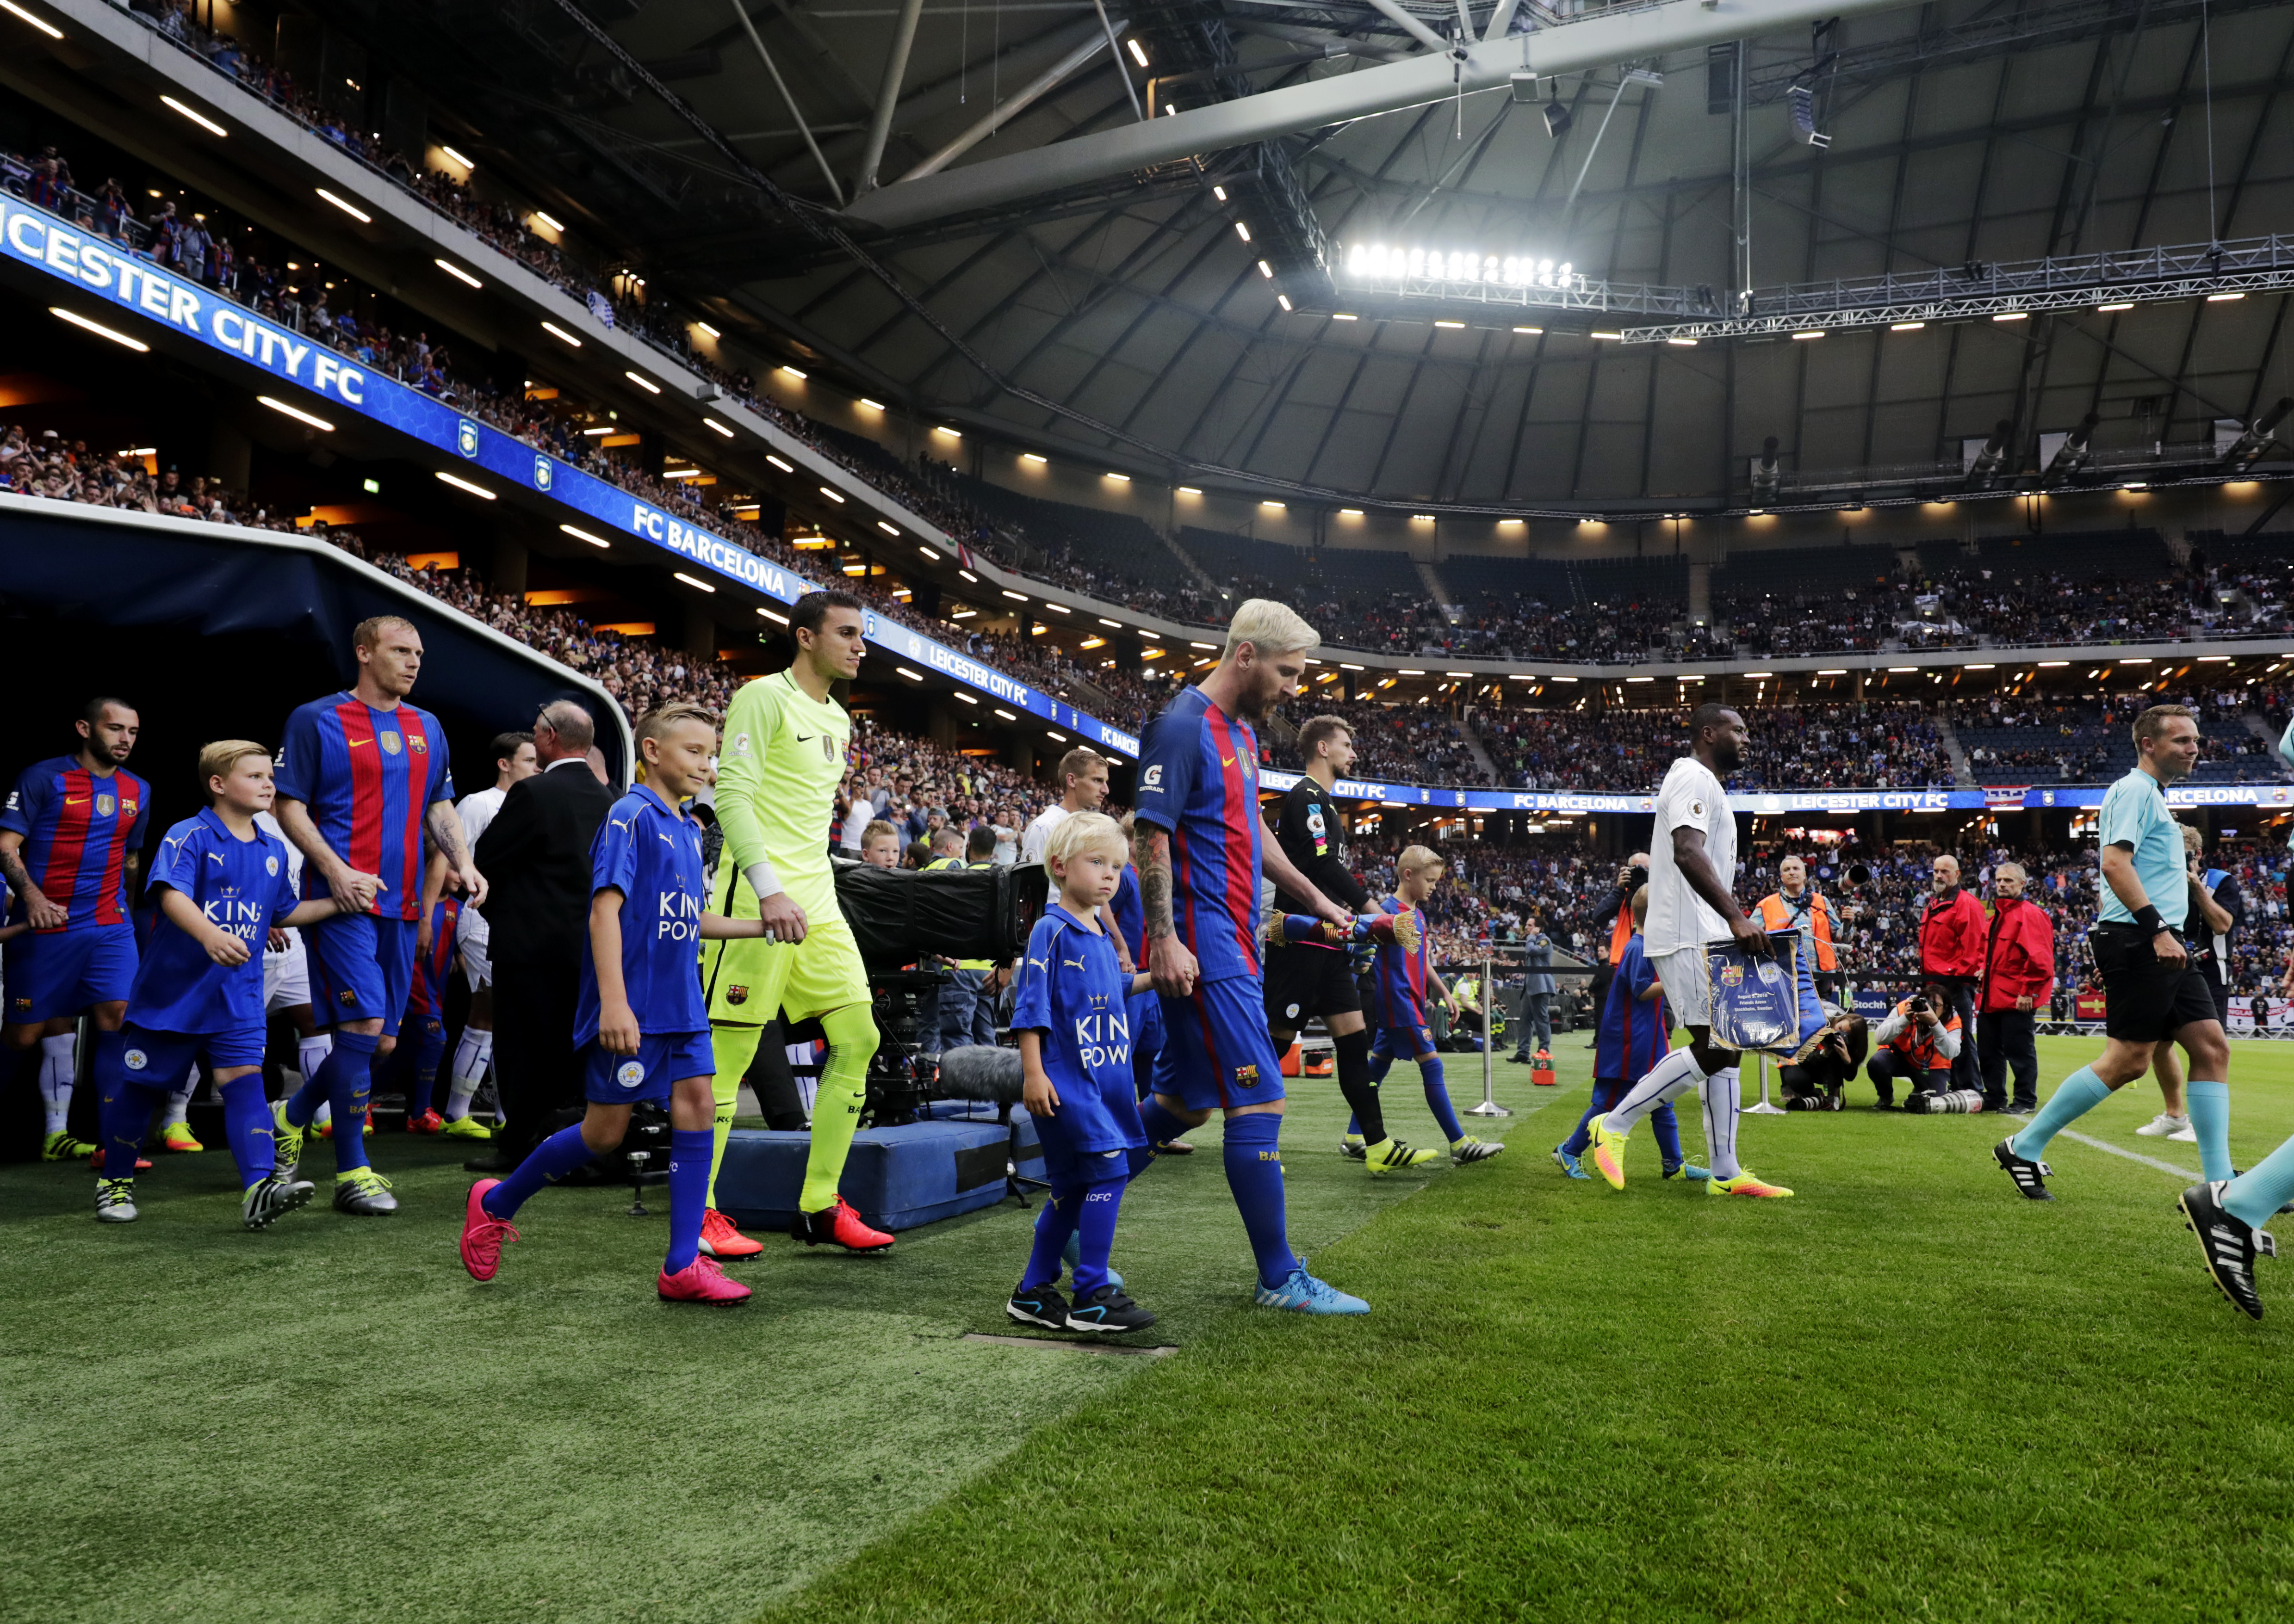 SOLNA, SWEDEN - AUGUST 03: Lionel Messi of FC Barcelona enters the pitch during the Pre-Season Friendly between Leicester City FC and FC Barcelona at Friends arena on August 3, 2016 in Solna, Sweden. (Photo by Nils Petter Nilsson/Ombrello/Getty Images)